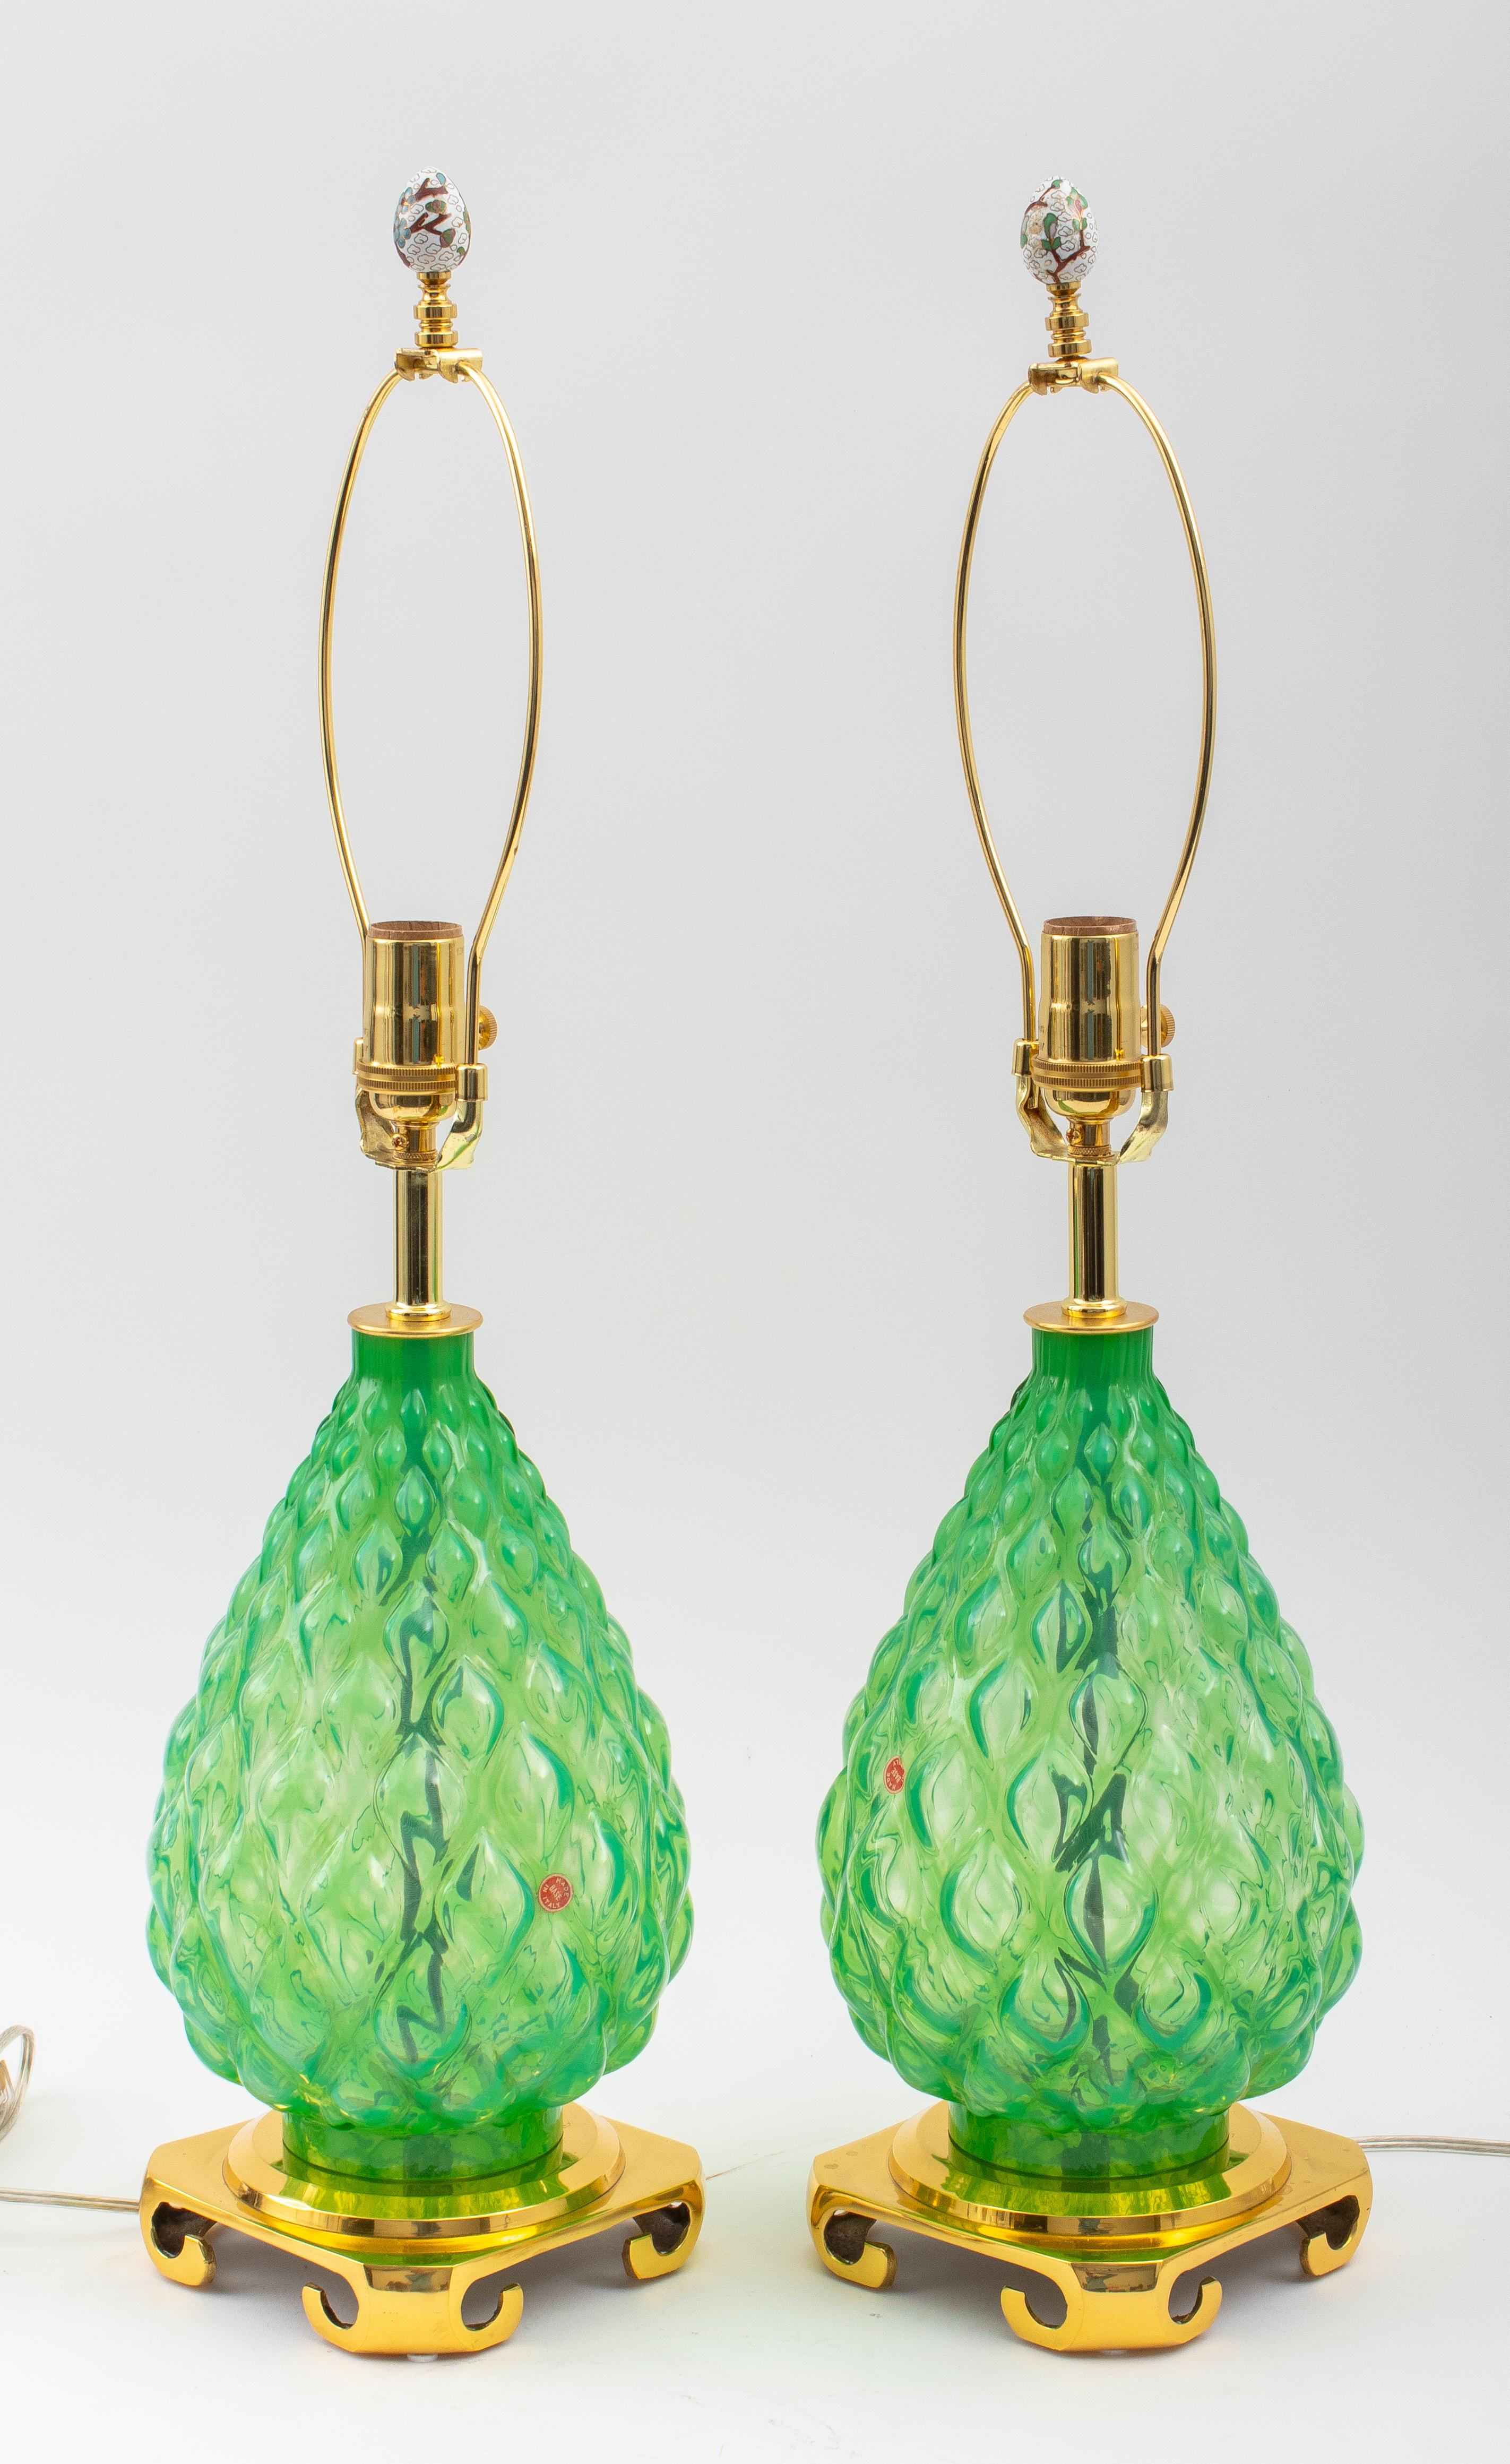 Pair of Murano green glass lamps. Made in Italy in the 1960's. Recently Rewired with high quality parts. Heavy cast brass bases.